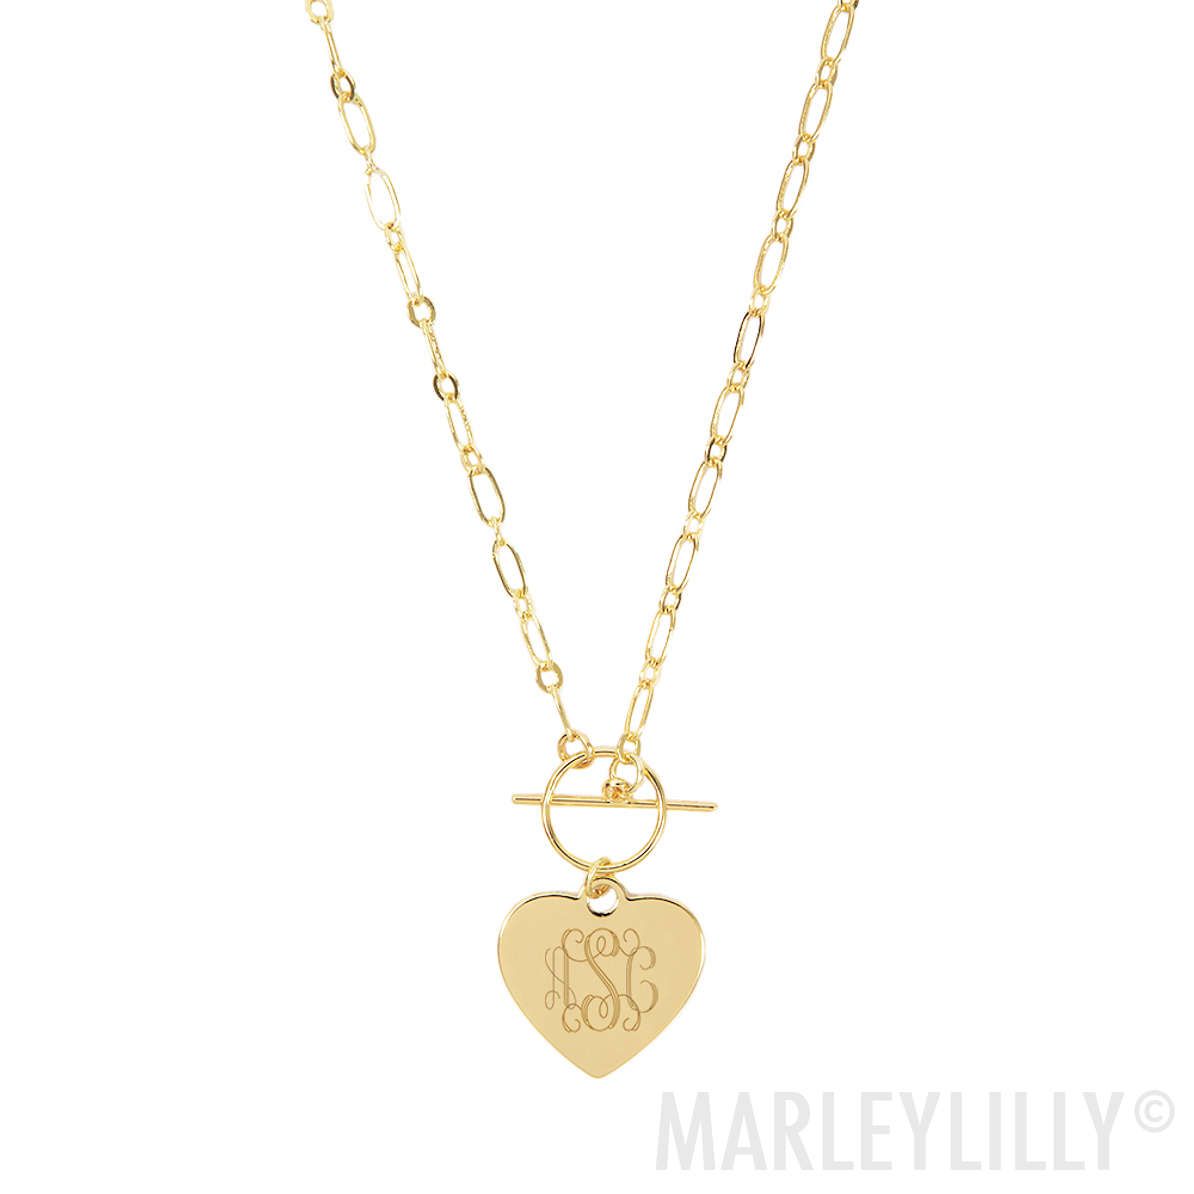 Personalized Heart Pendant Necklace | Marleylilly